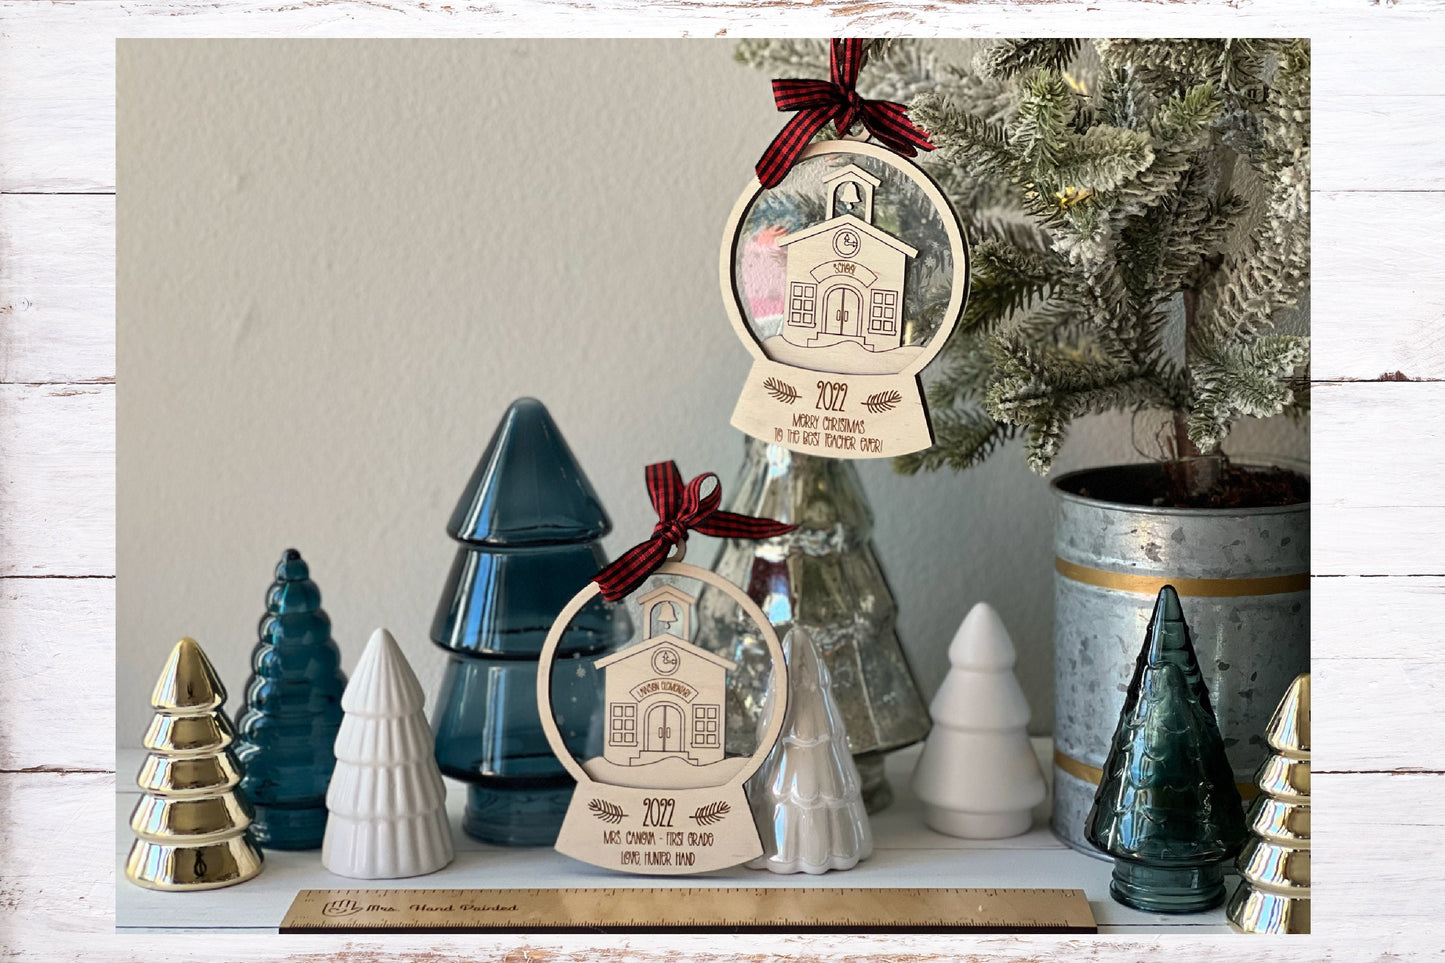 School Snow Globe Ornament Laser Cut Wood and Acrylic Personalized Teacher Gift